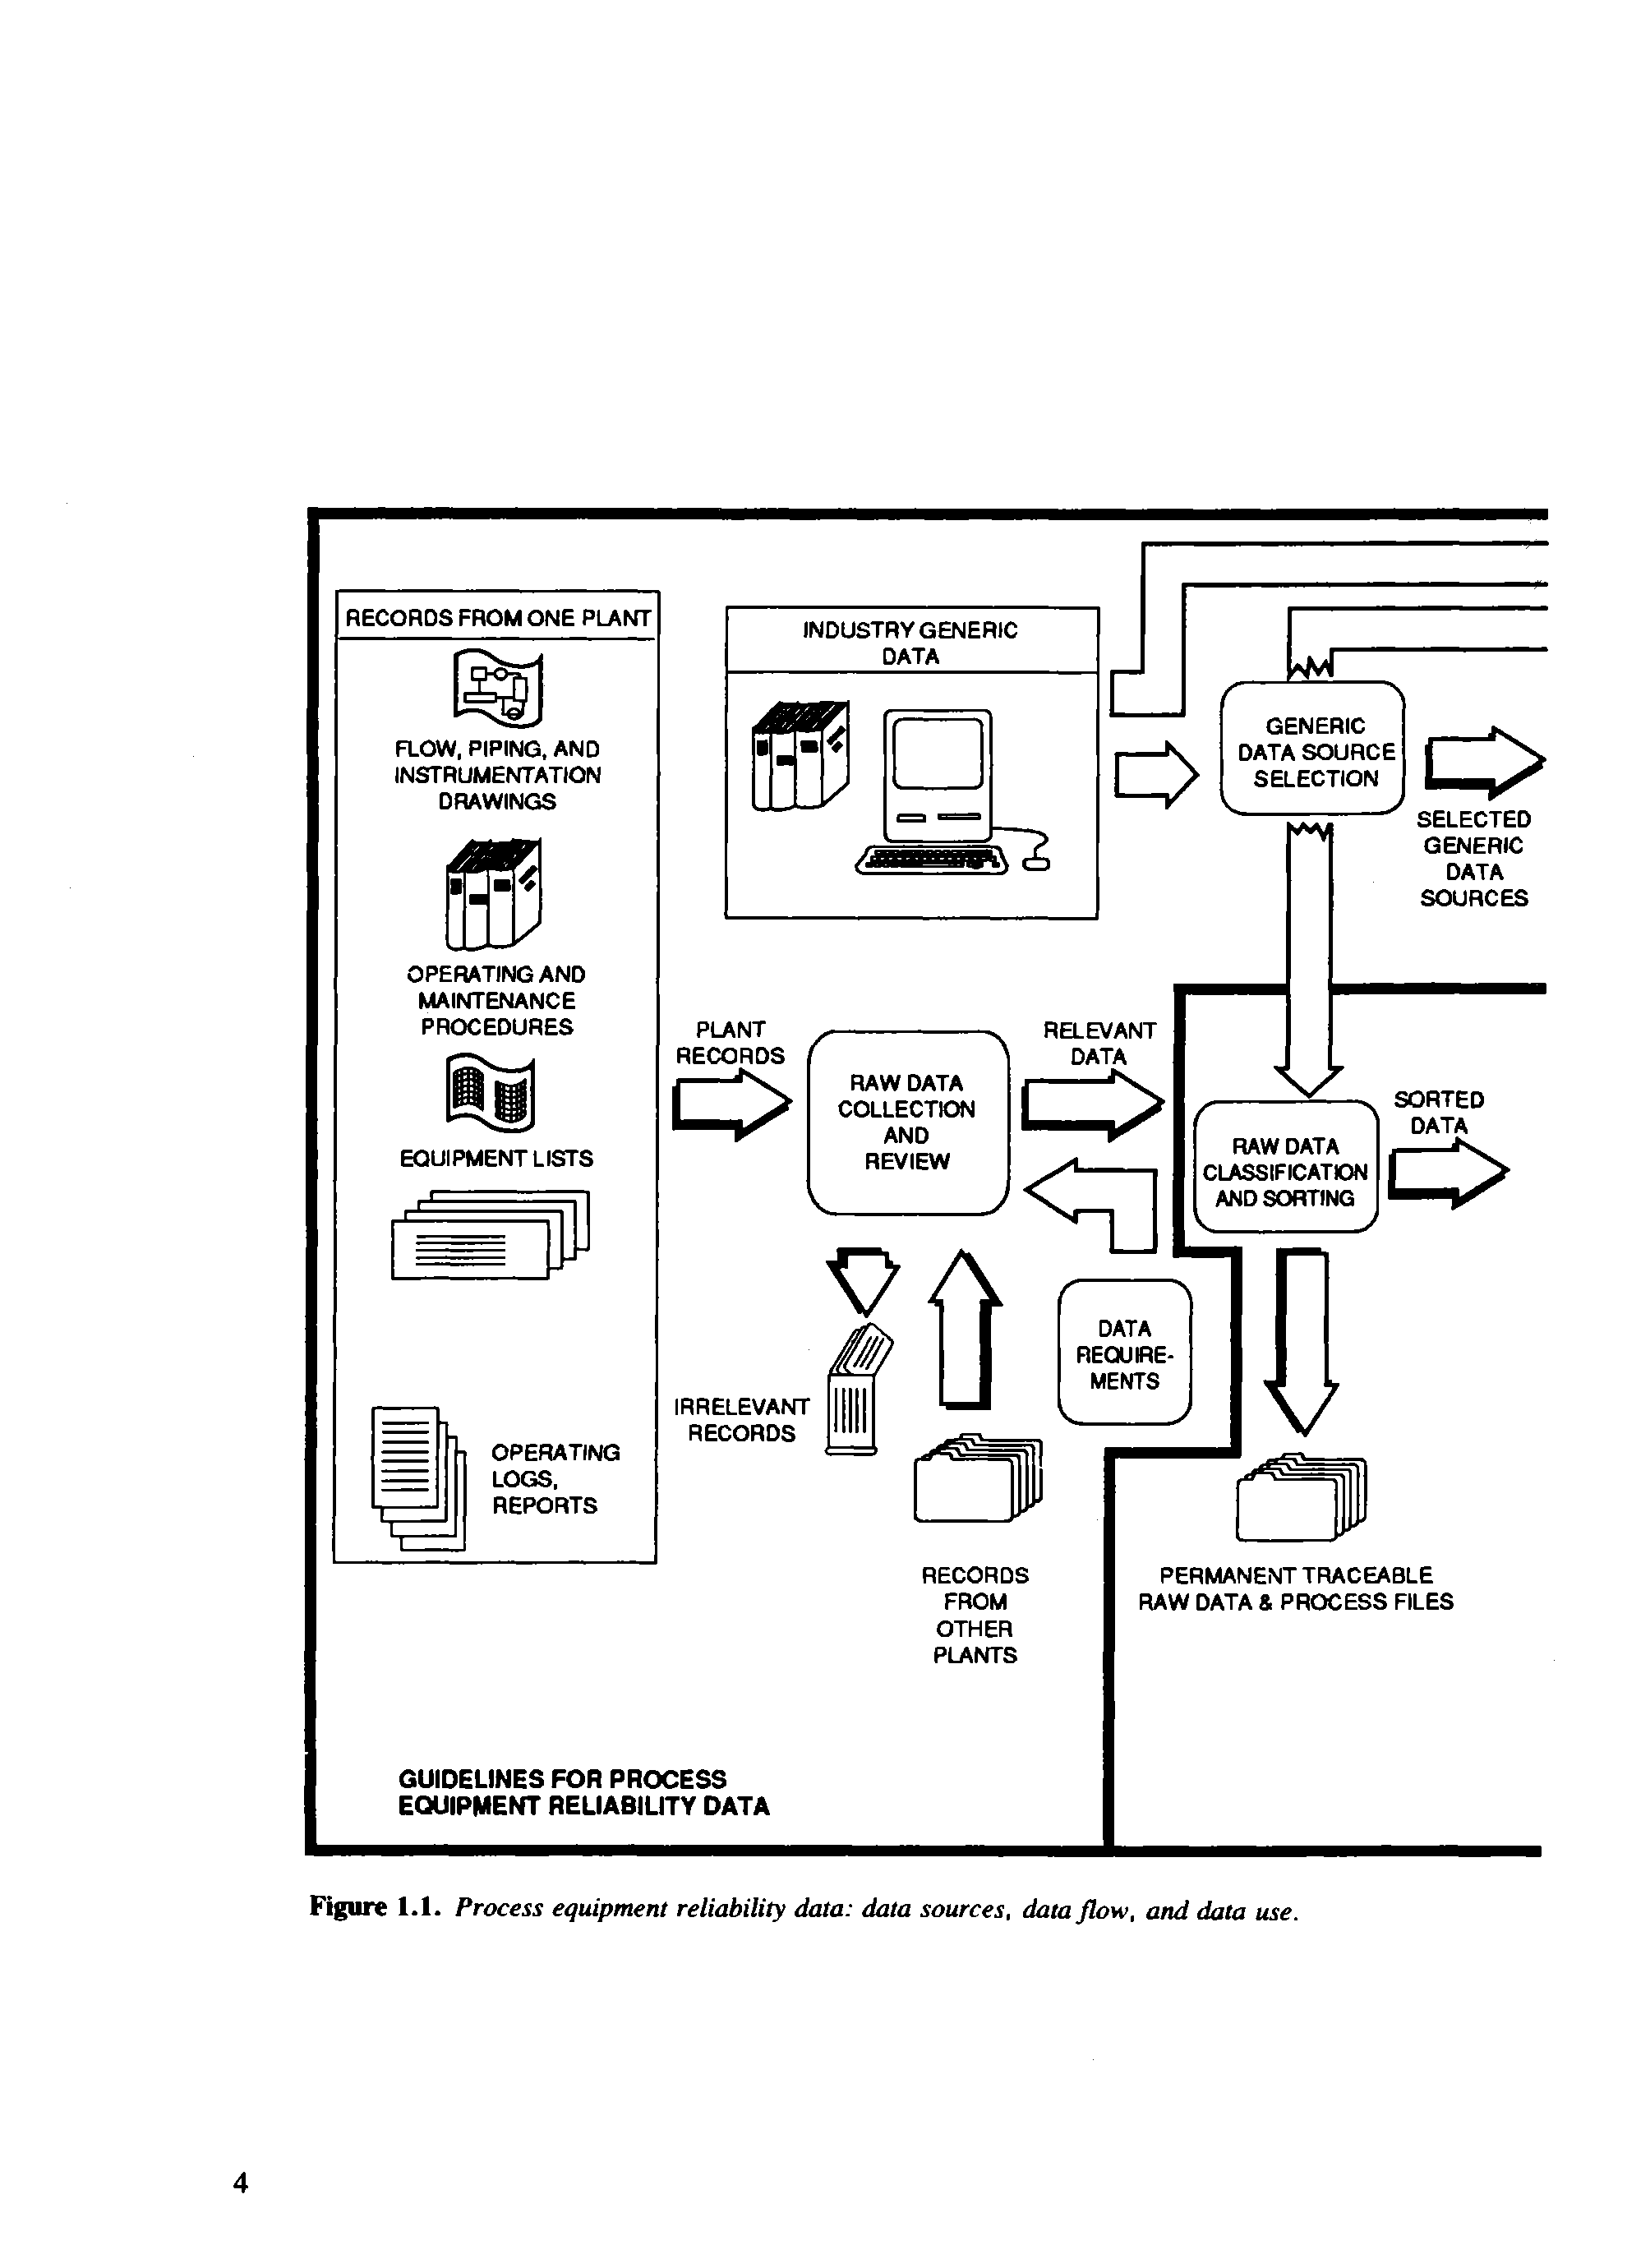 Figure 1.1. Process equipment reliability data data sources, data flow, and data use.